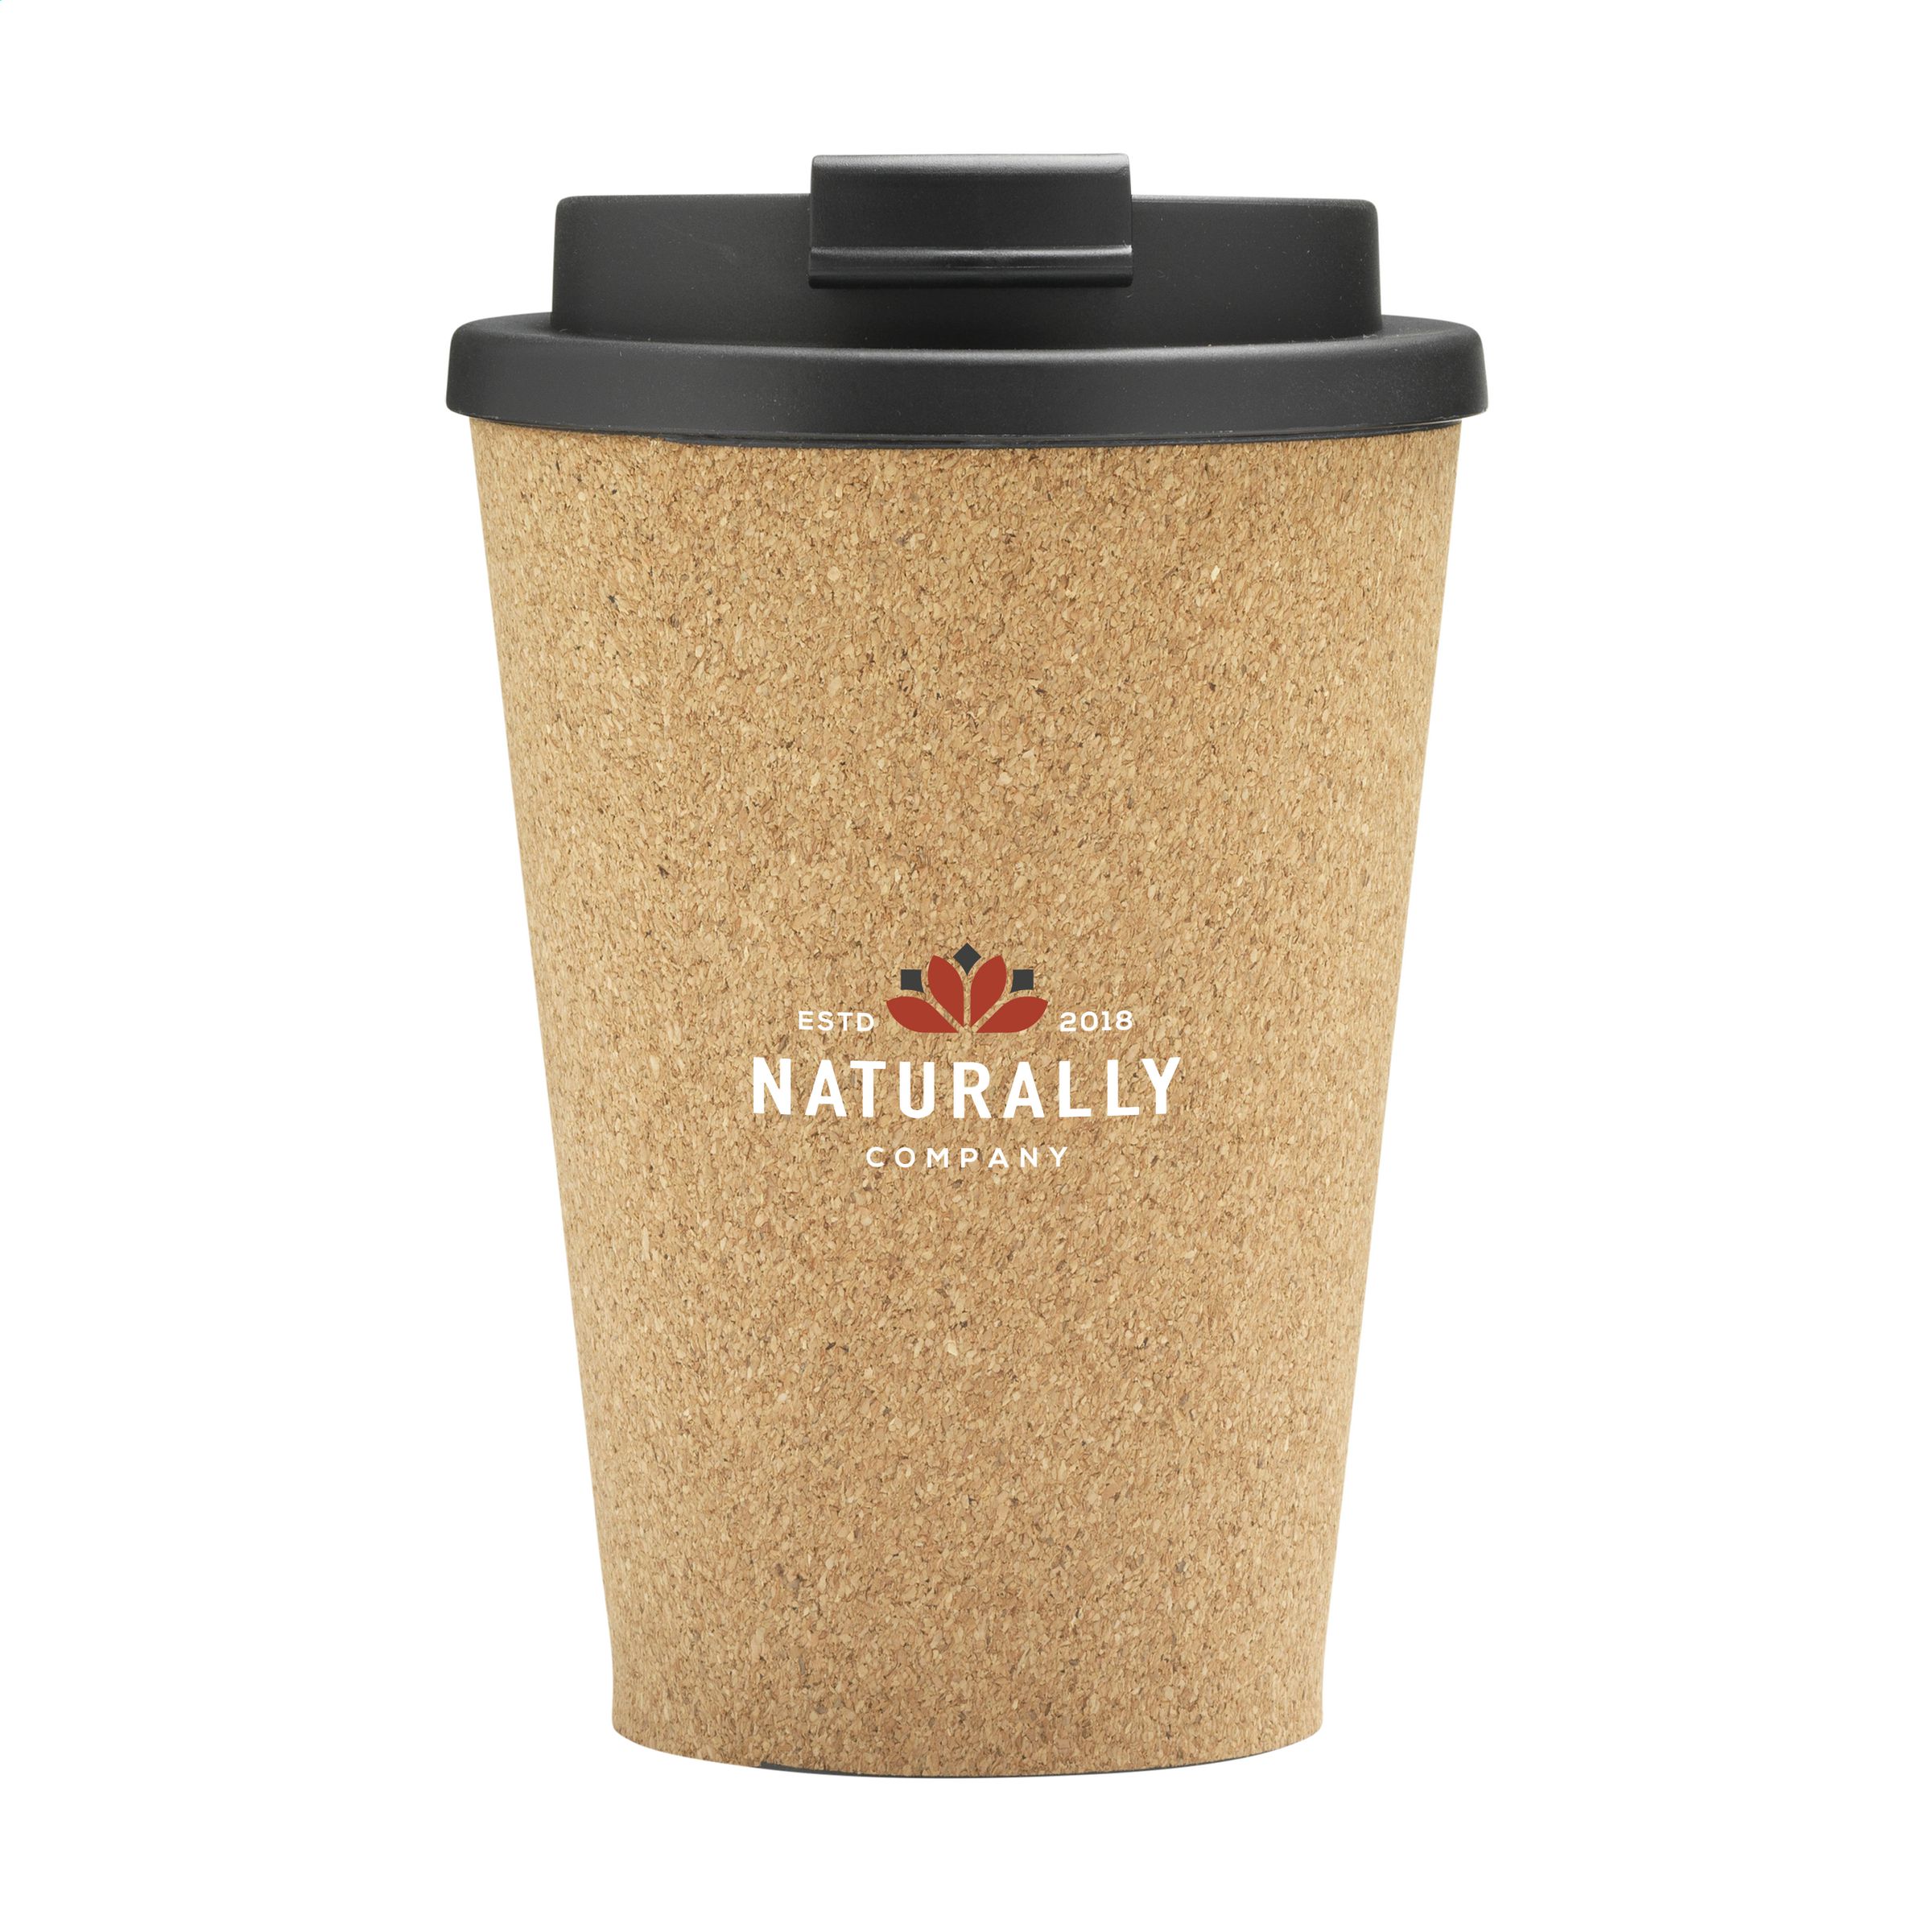 A coffee cup made from natural, recyclable cork that's designed for taking your coffee on the go. - Marshfield